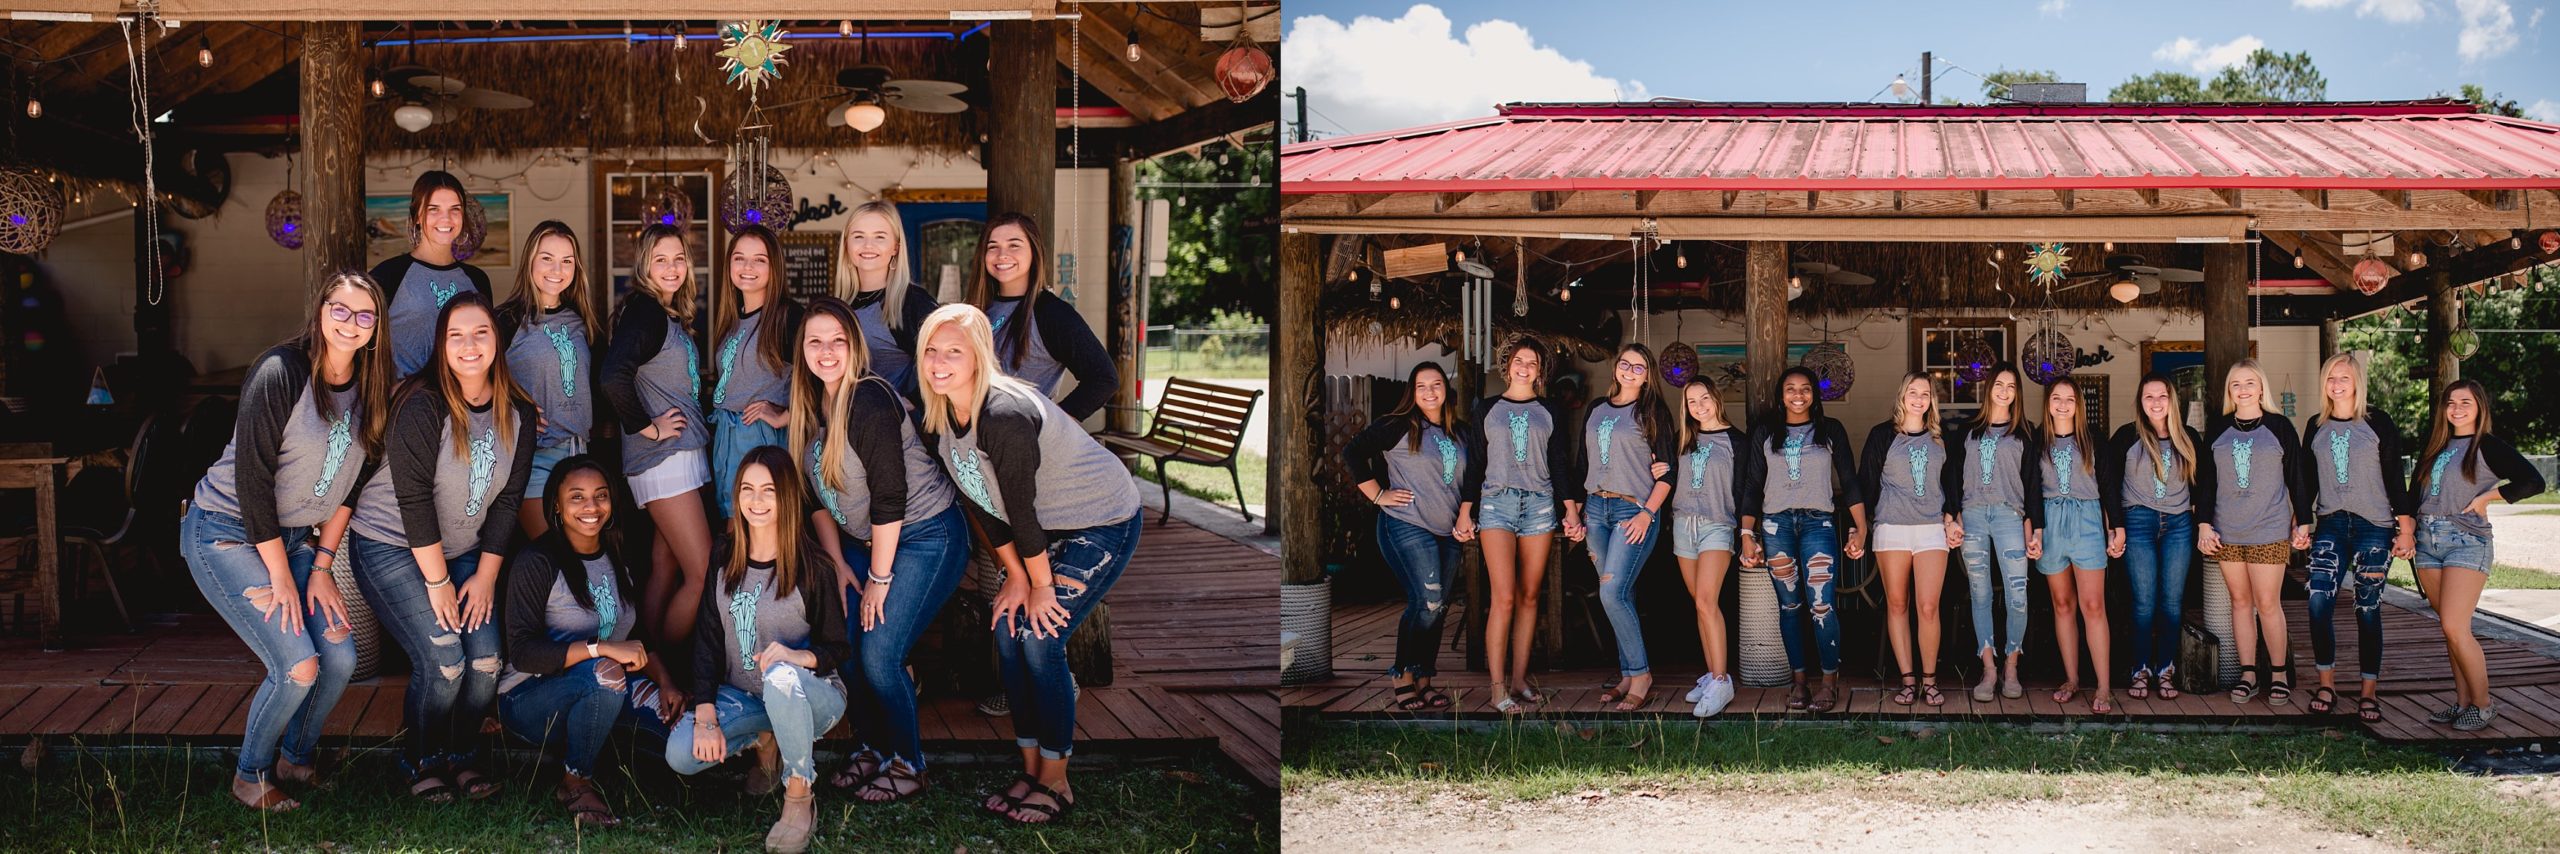 Senior model team meet up with professional photographer in North Florida.